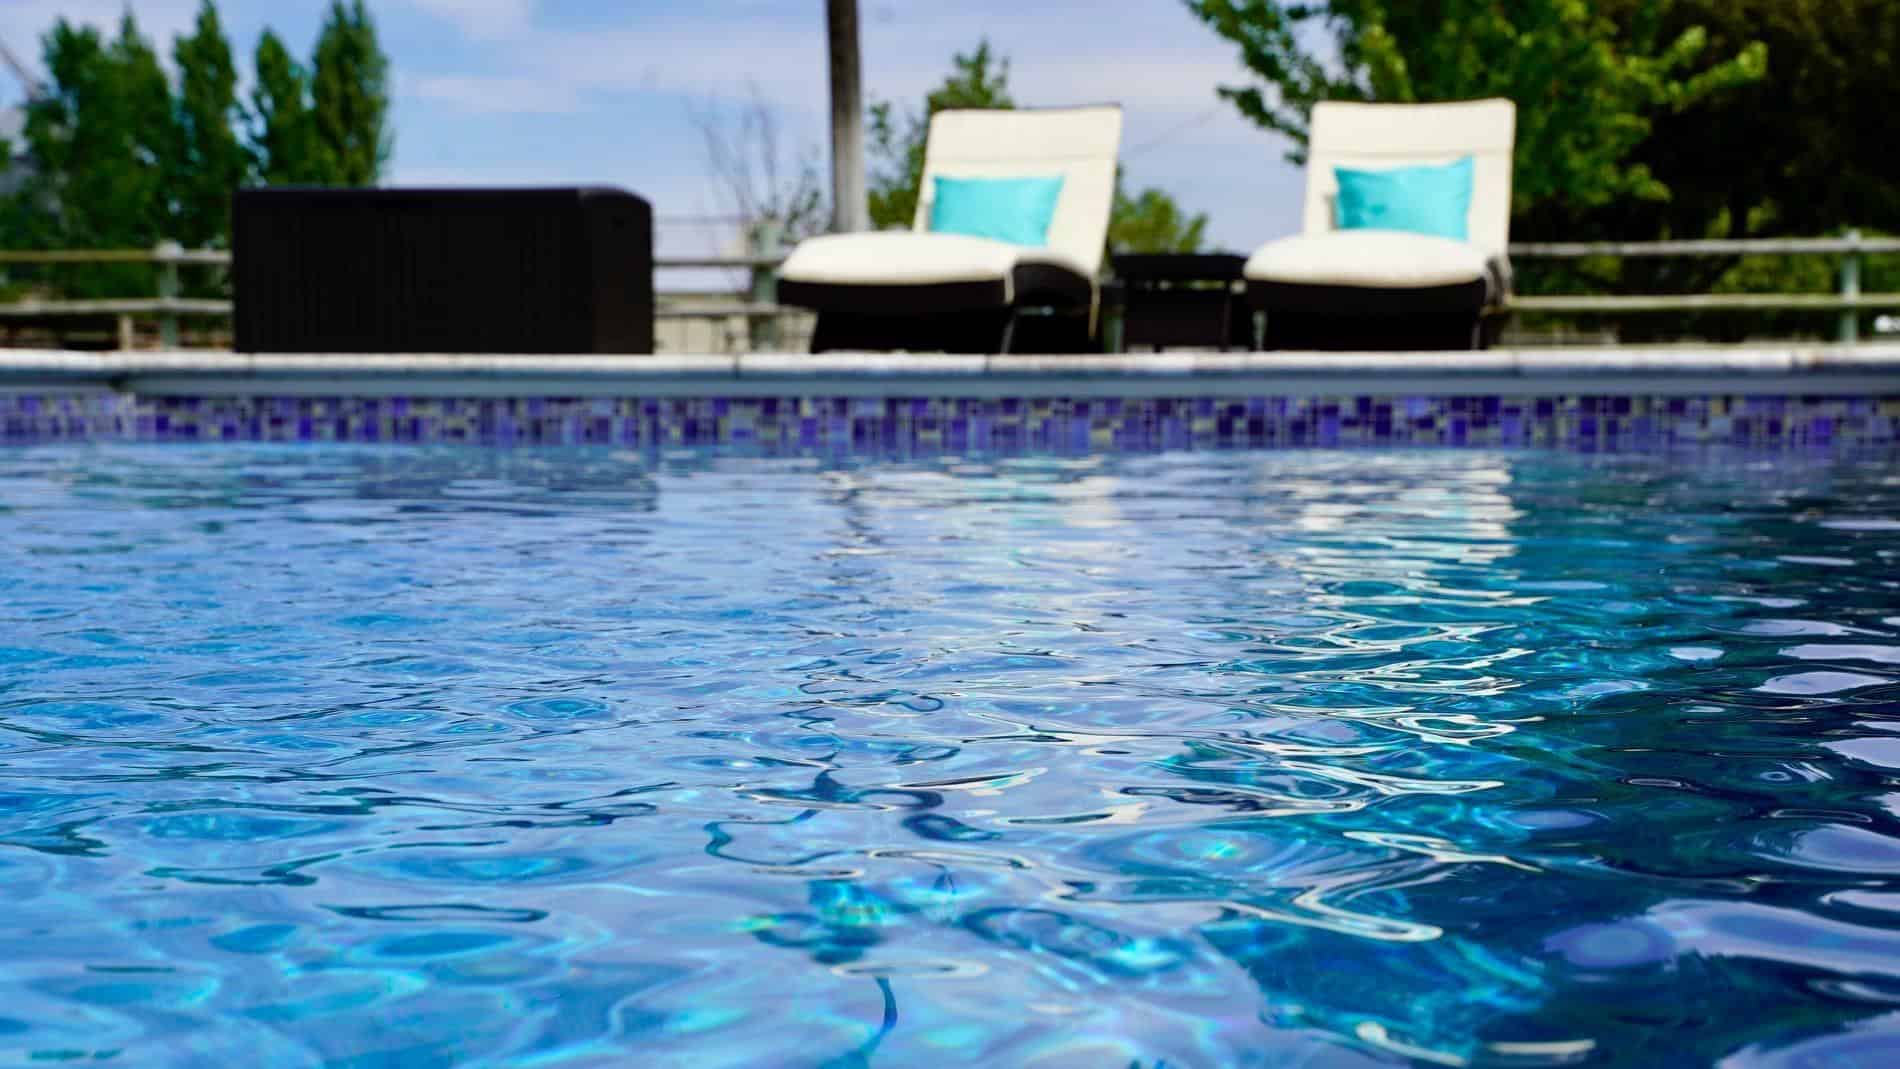 A pool’s water is pristine thanks to our water care and maintenance tips for new pool owners.